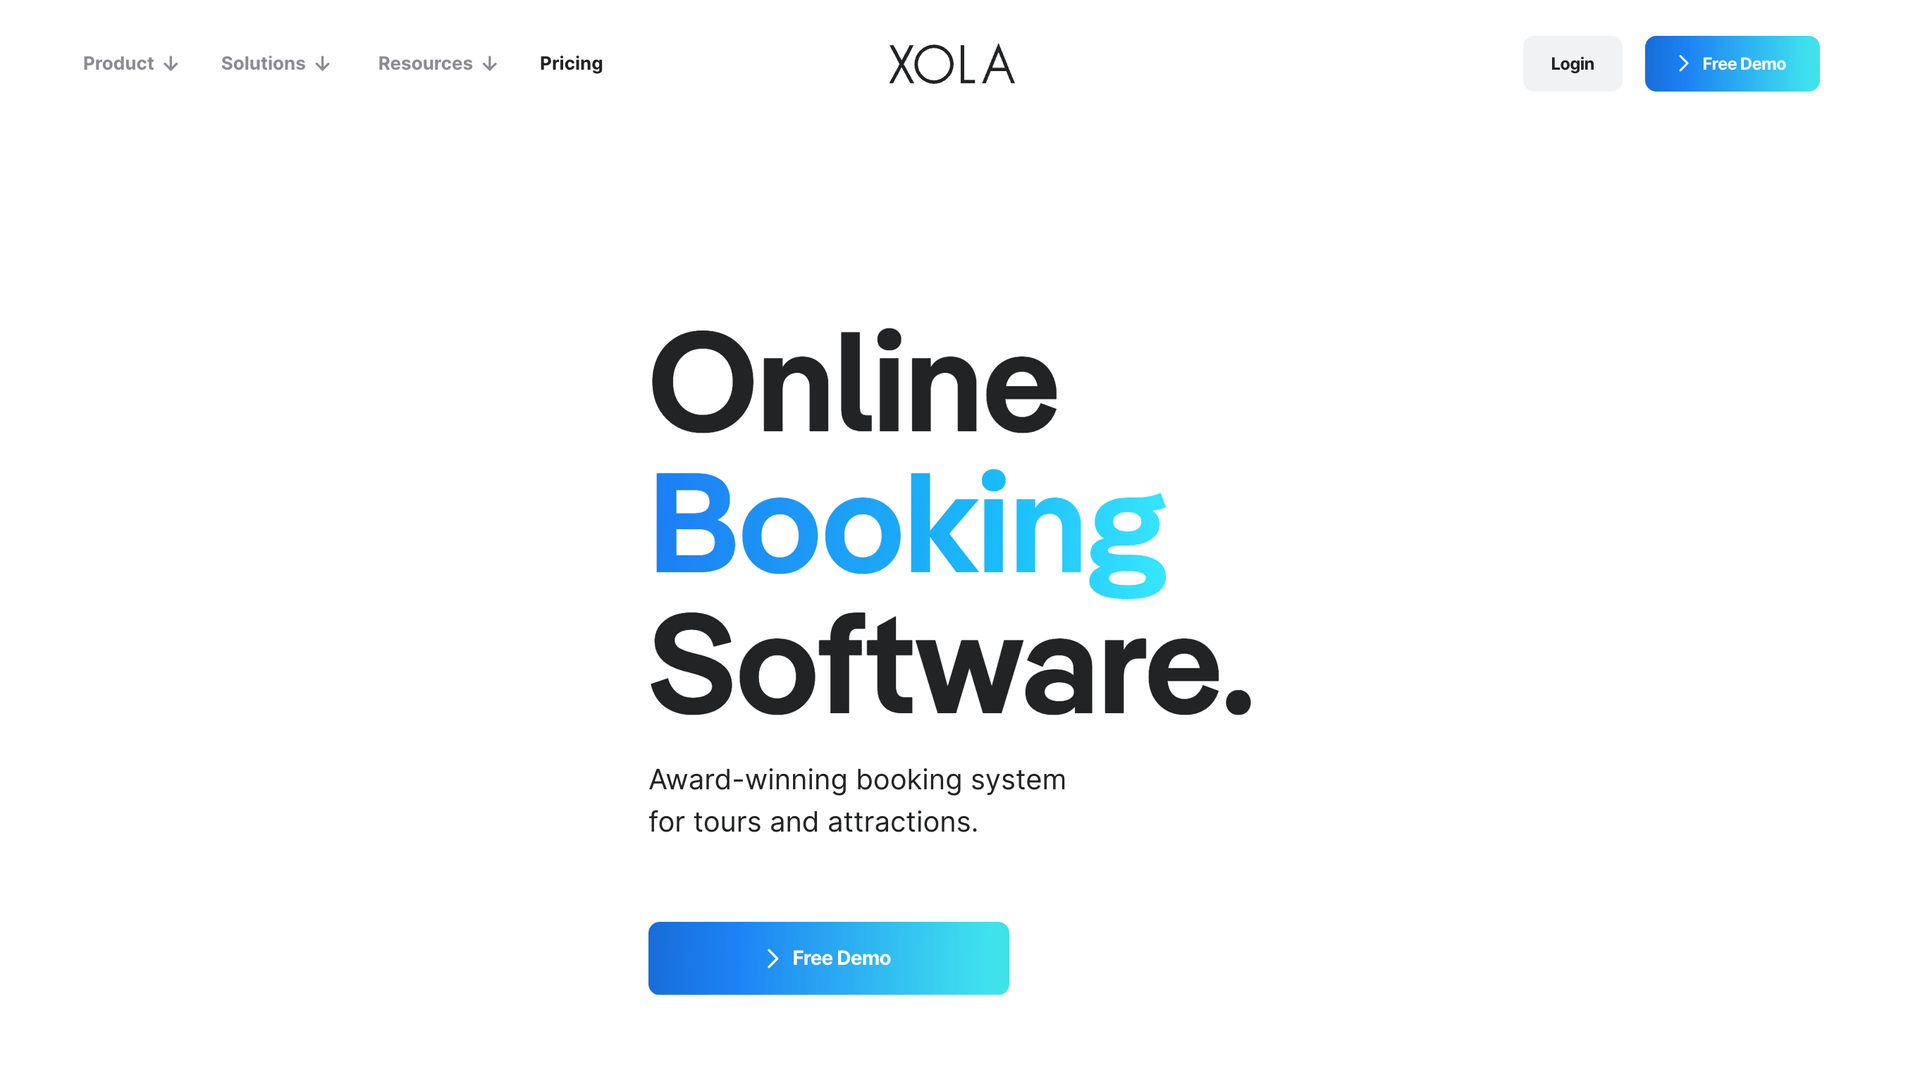 Xola homepage: Online Booking Software.